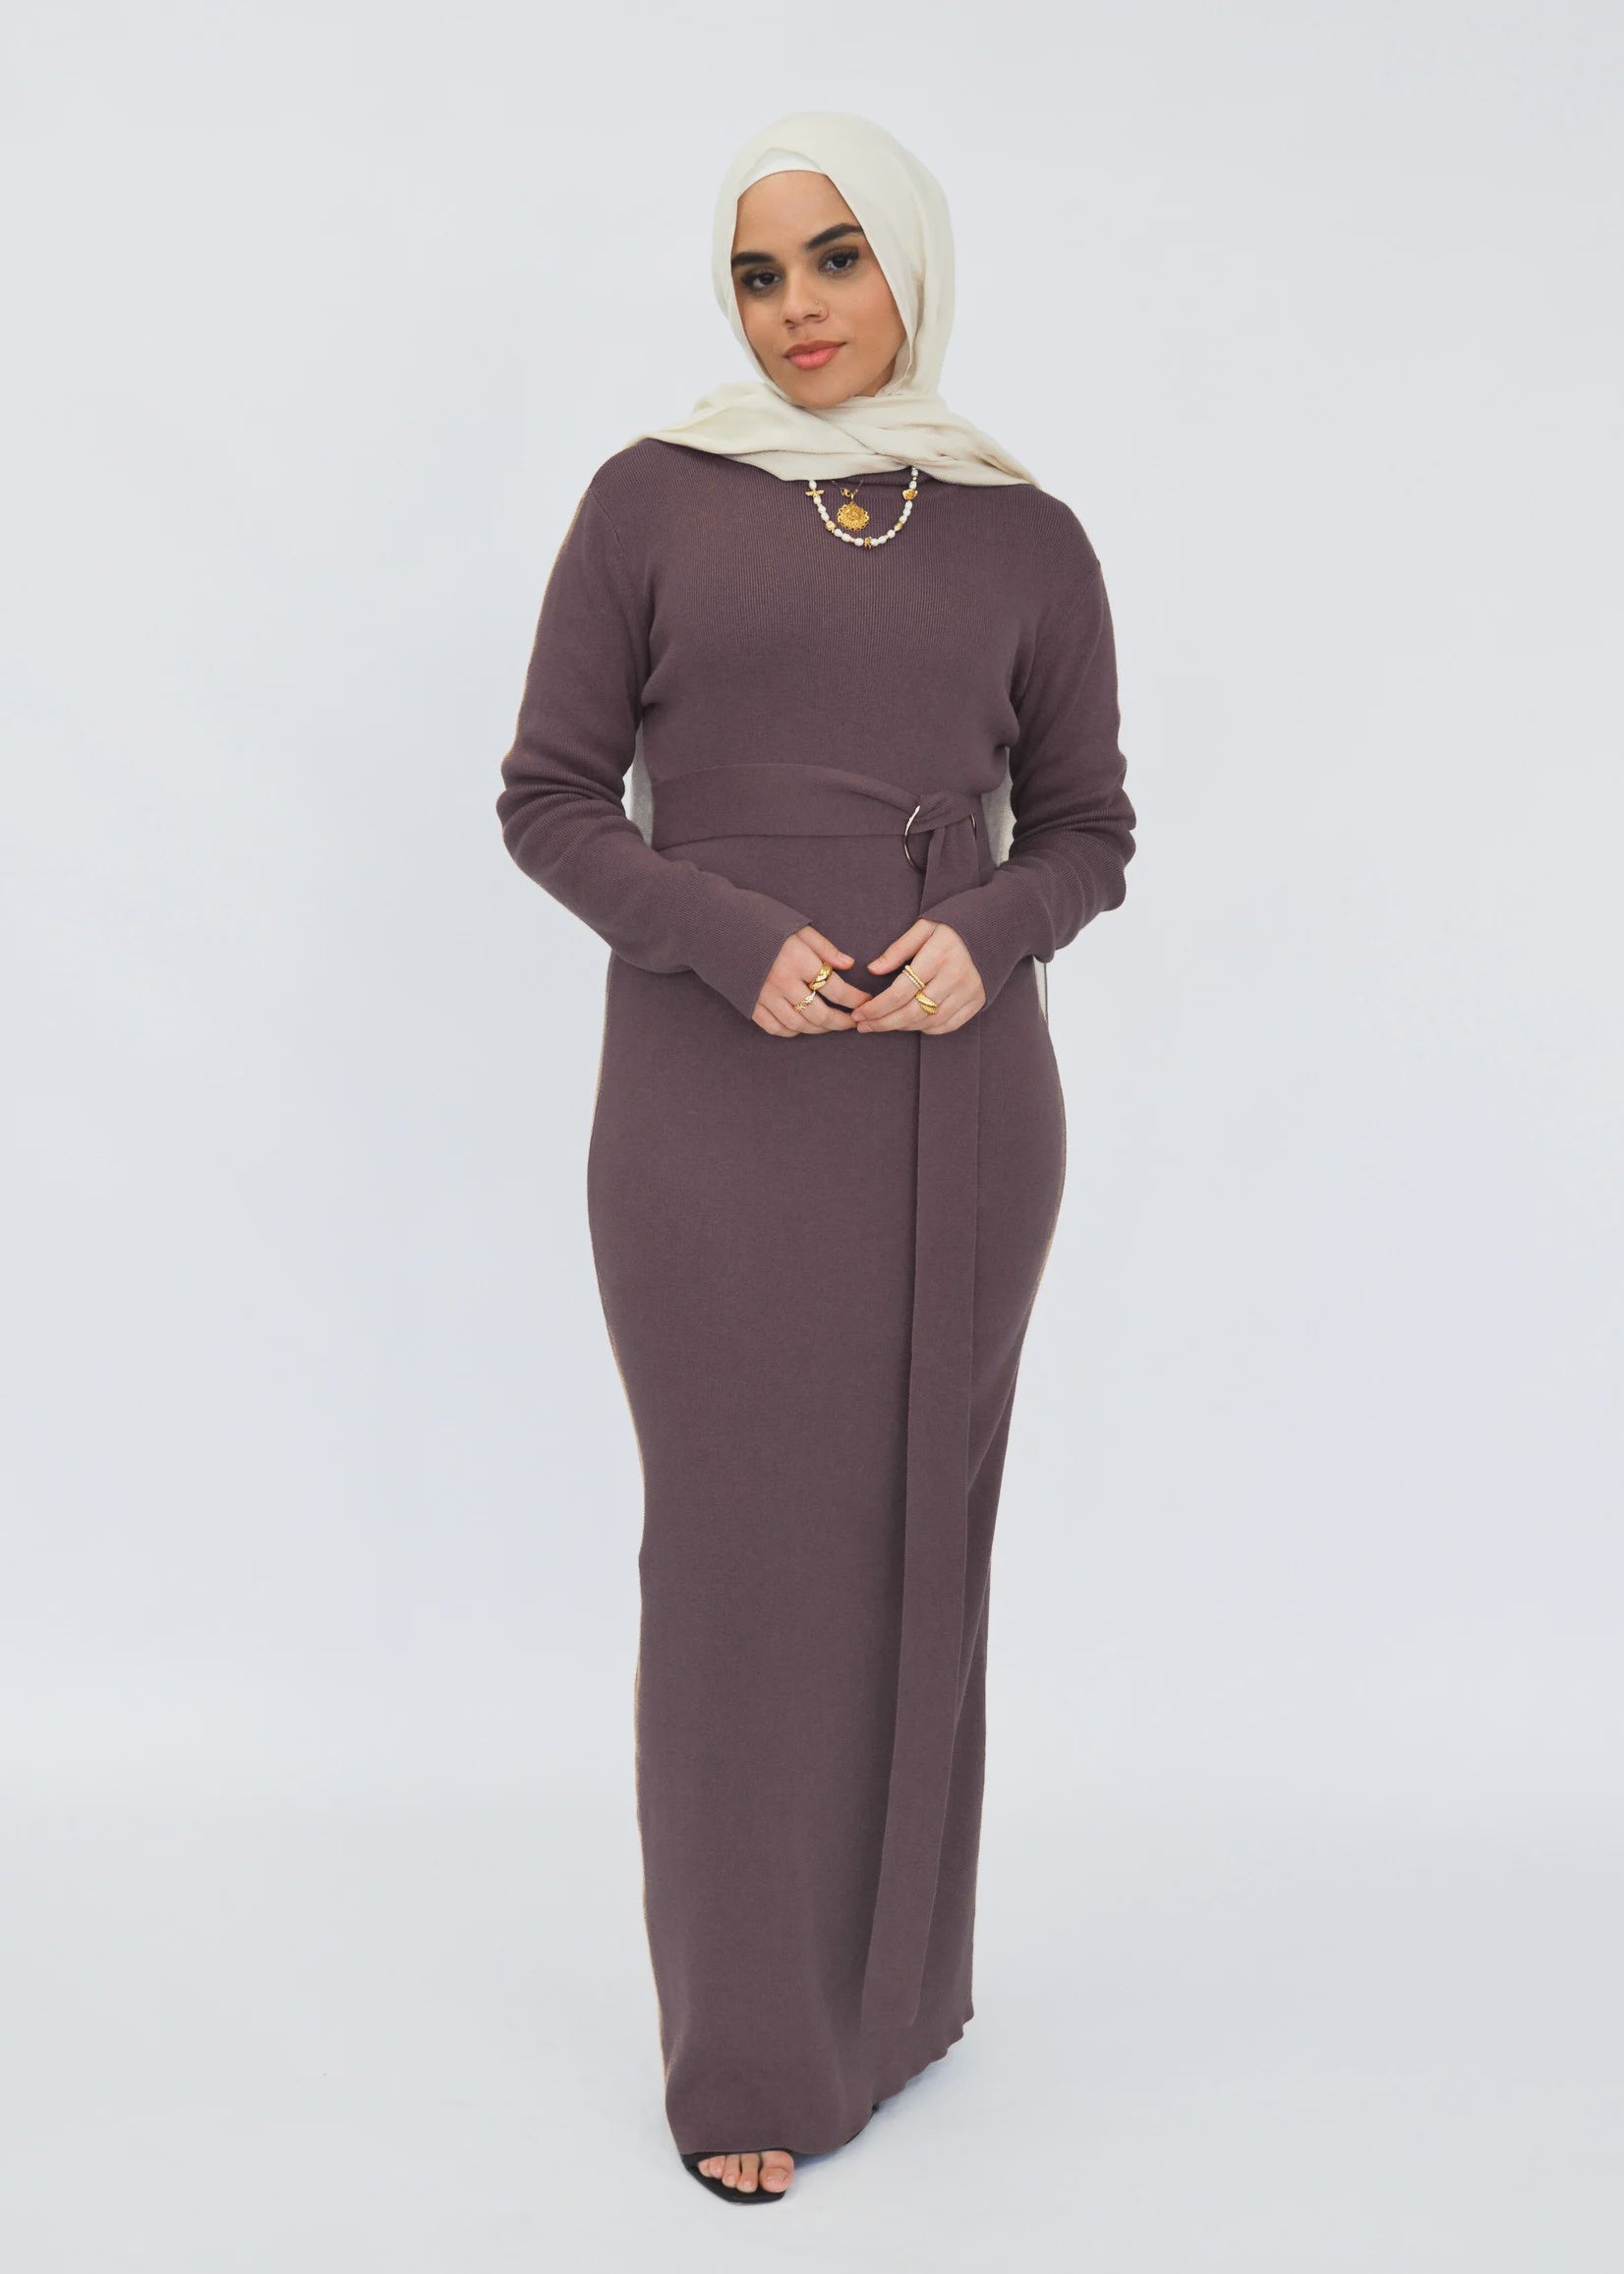 Wintertide Belted Dress - Chocolate